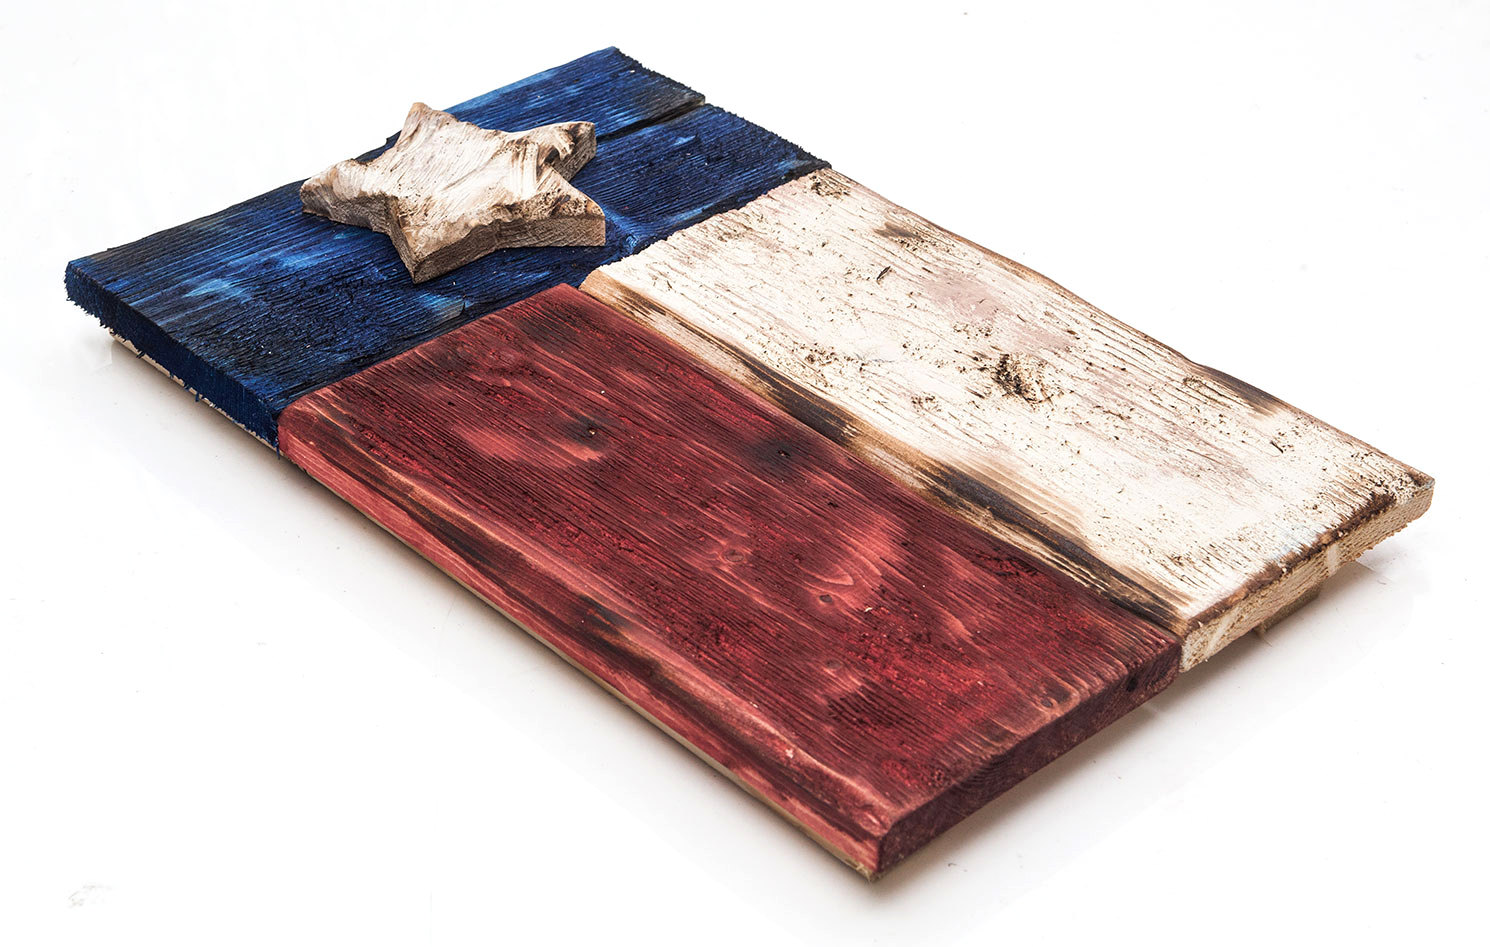 Weathered Wood One of a kind 3D Texas flag, Wooden, vintage, art, distressed, weathered, recycled, Texas flag art, red blue, home decor